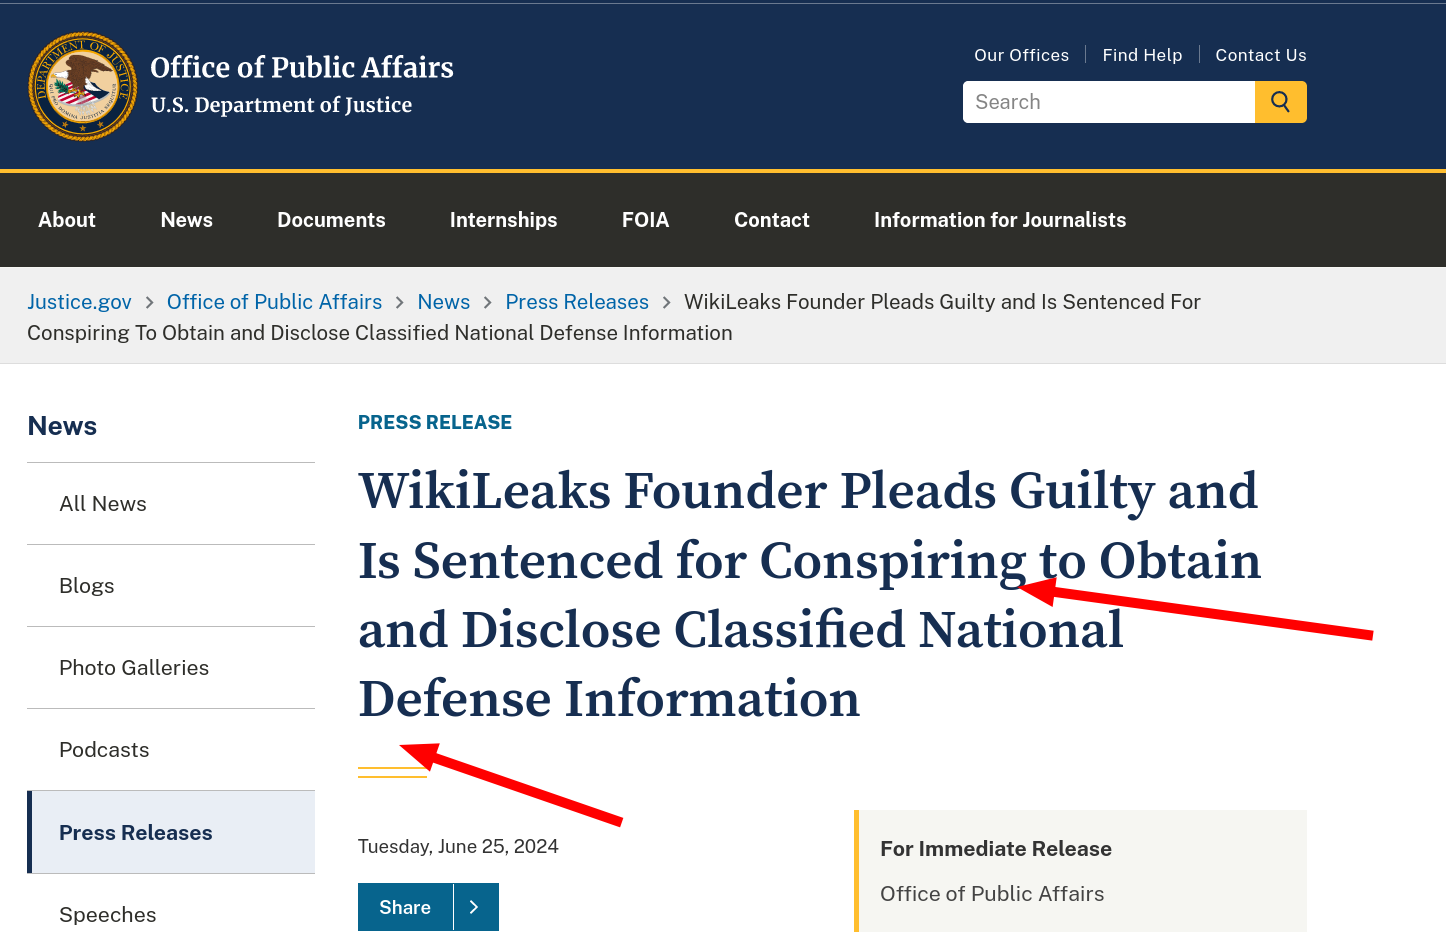 WikiLeaks Founder Pleads Guilty and Is Sentenced for Conspiring to Obtain and Disclose Classified National Defense Information